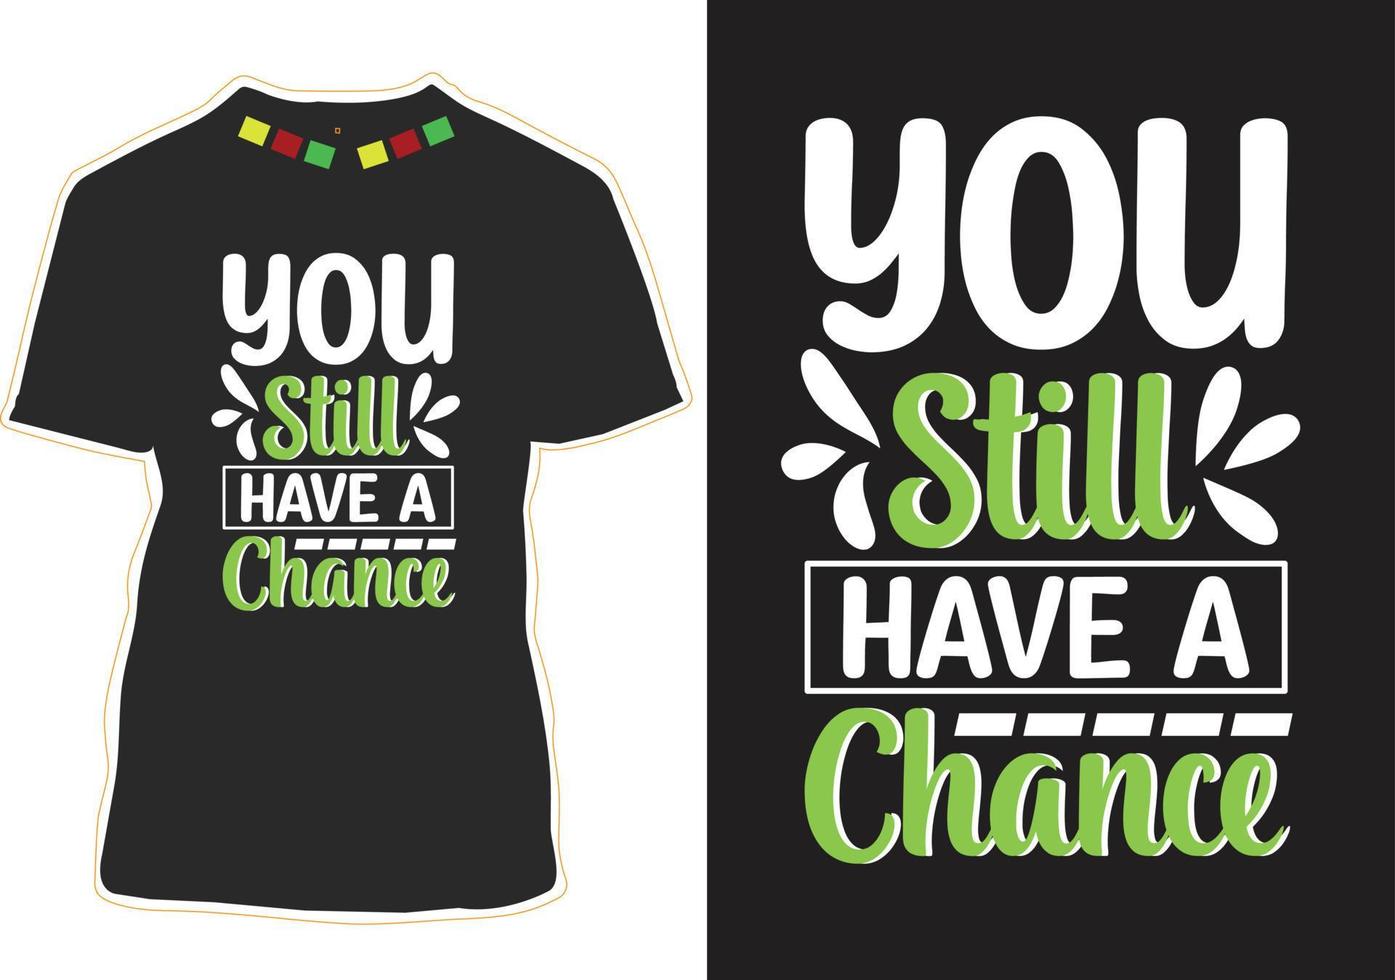 You Still Have A Chance Motivational Quotes T-shirt Design vector